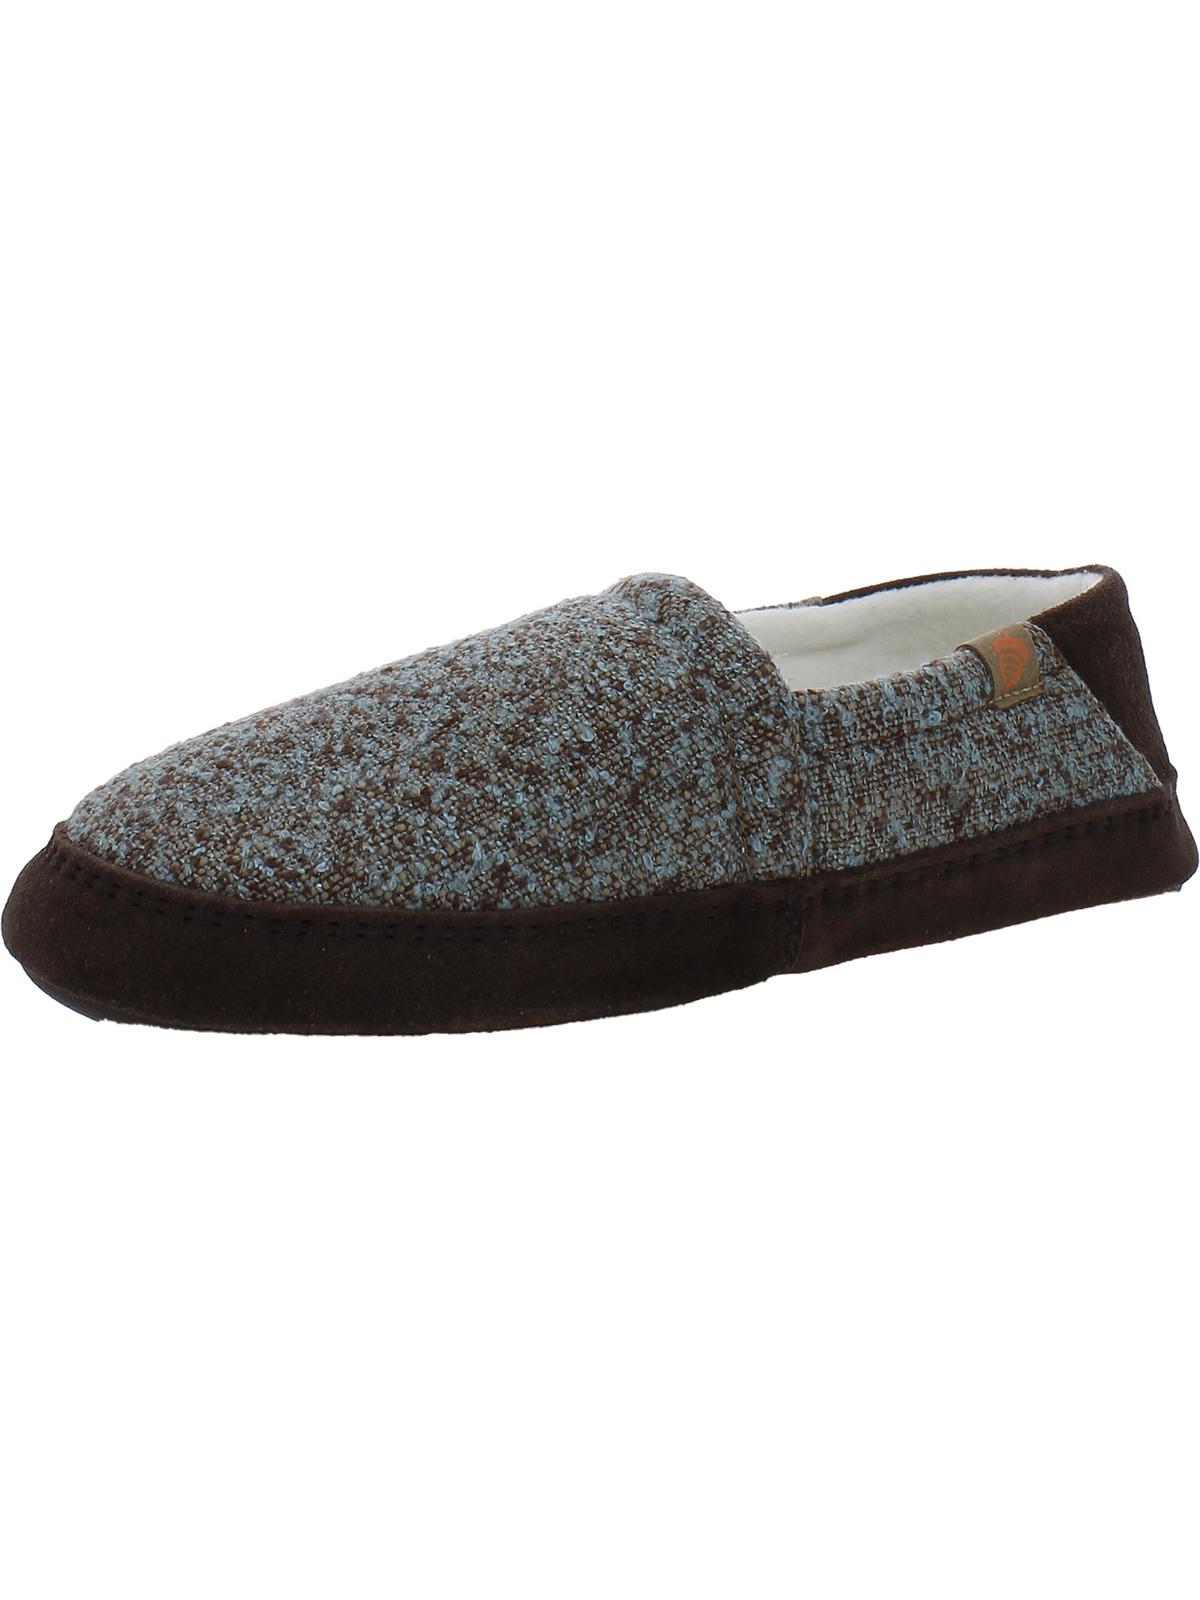 Acorn Womens Marled Manmade Moccasin Slippers In Gray